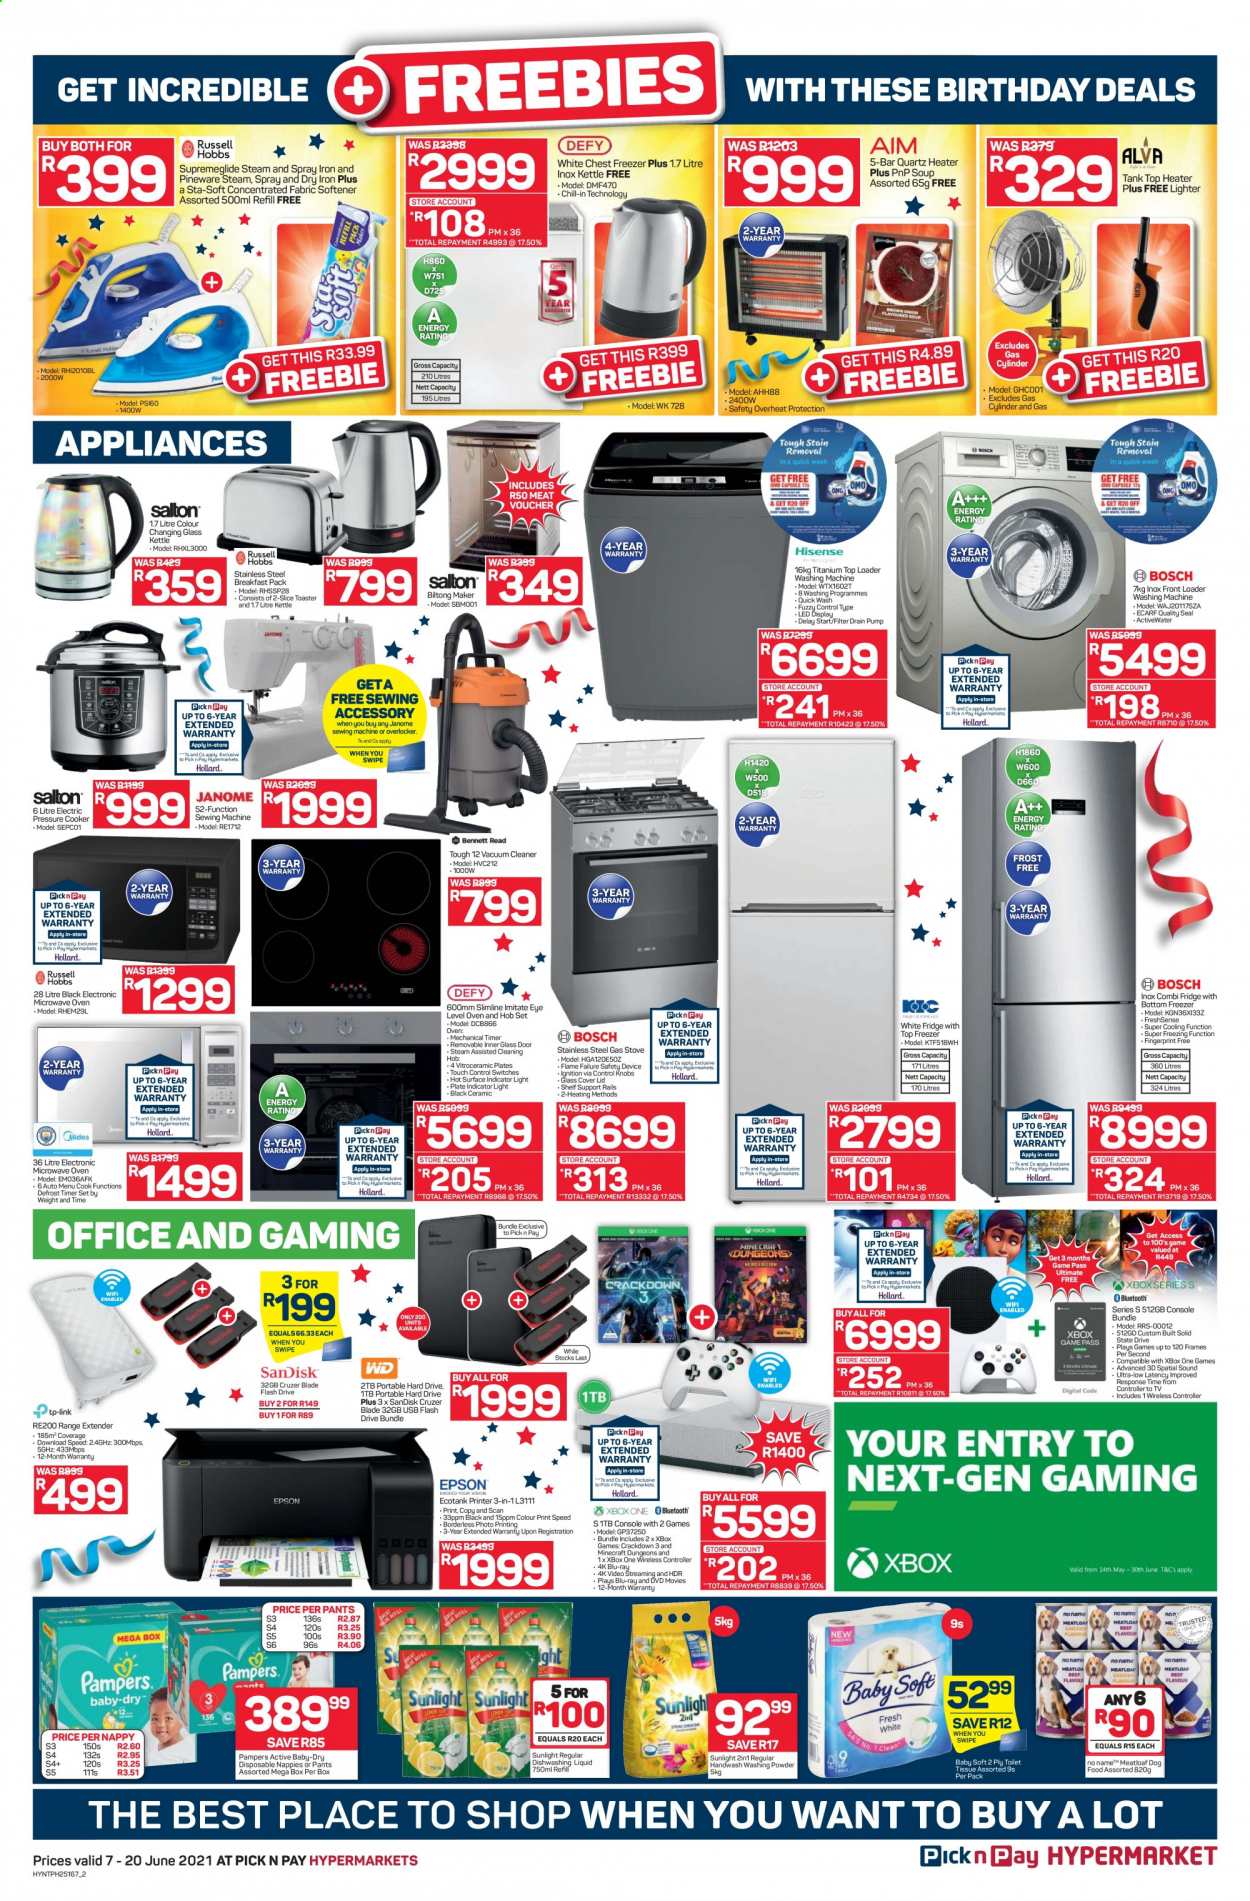 Pick n Pay specials - 06.07.2021 - 06.20.2021. 